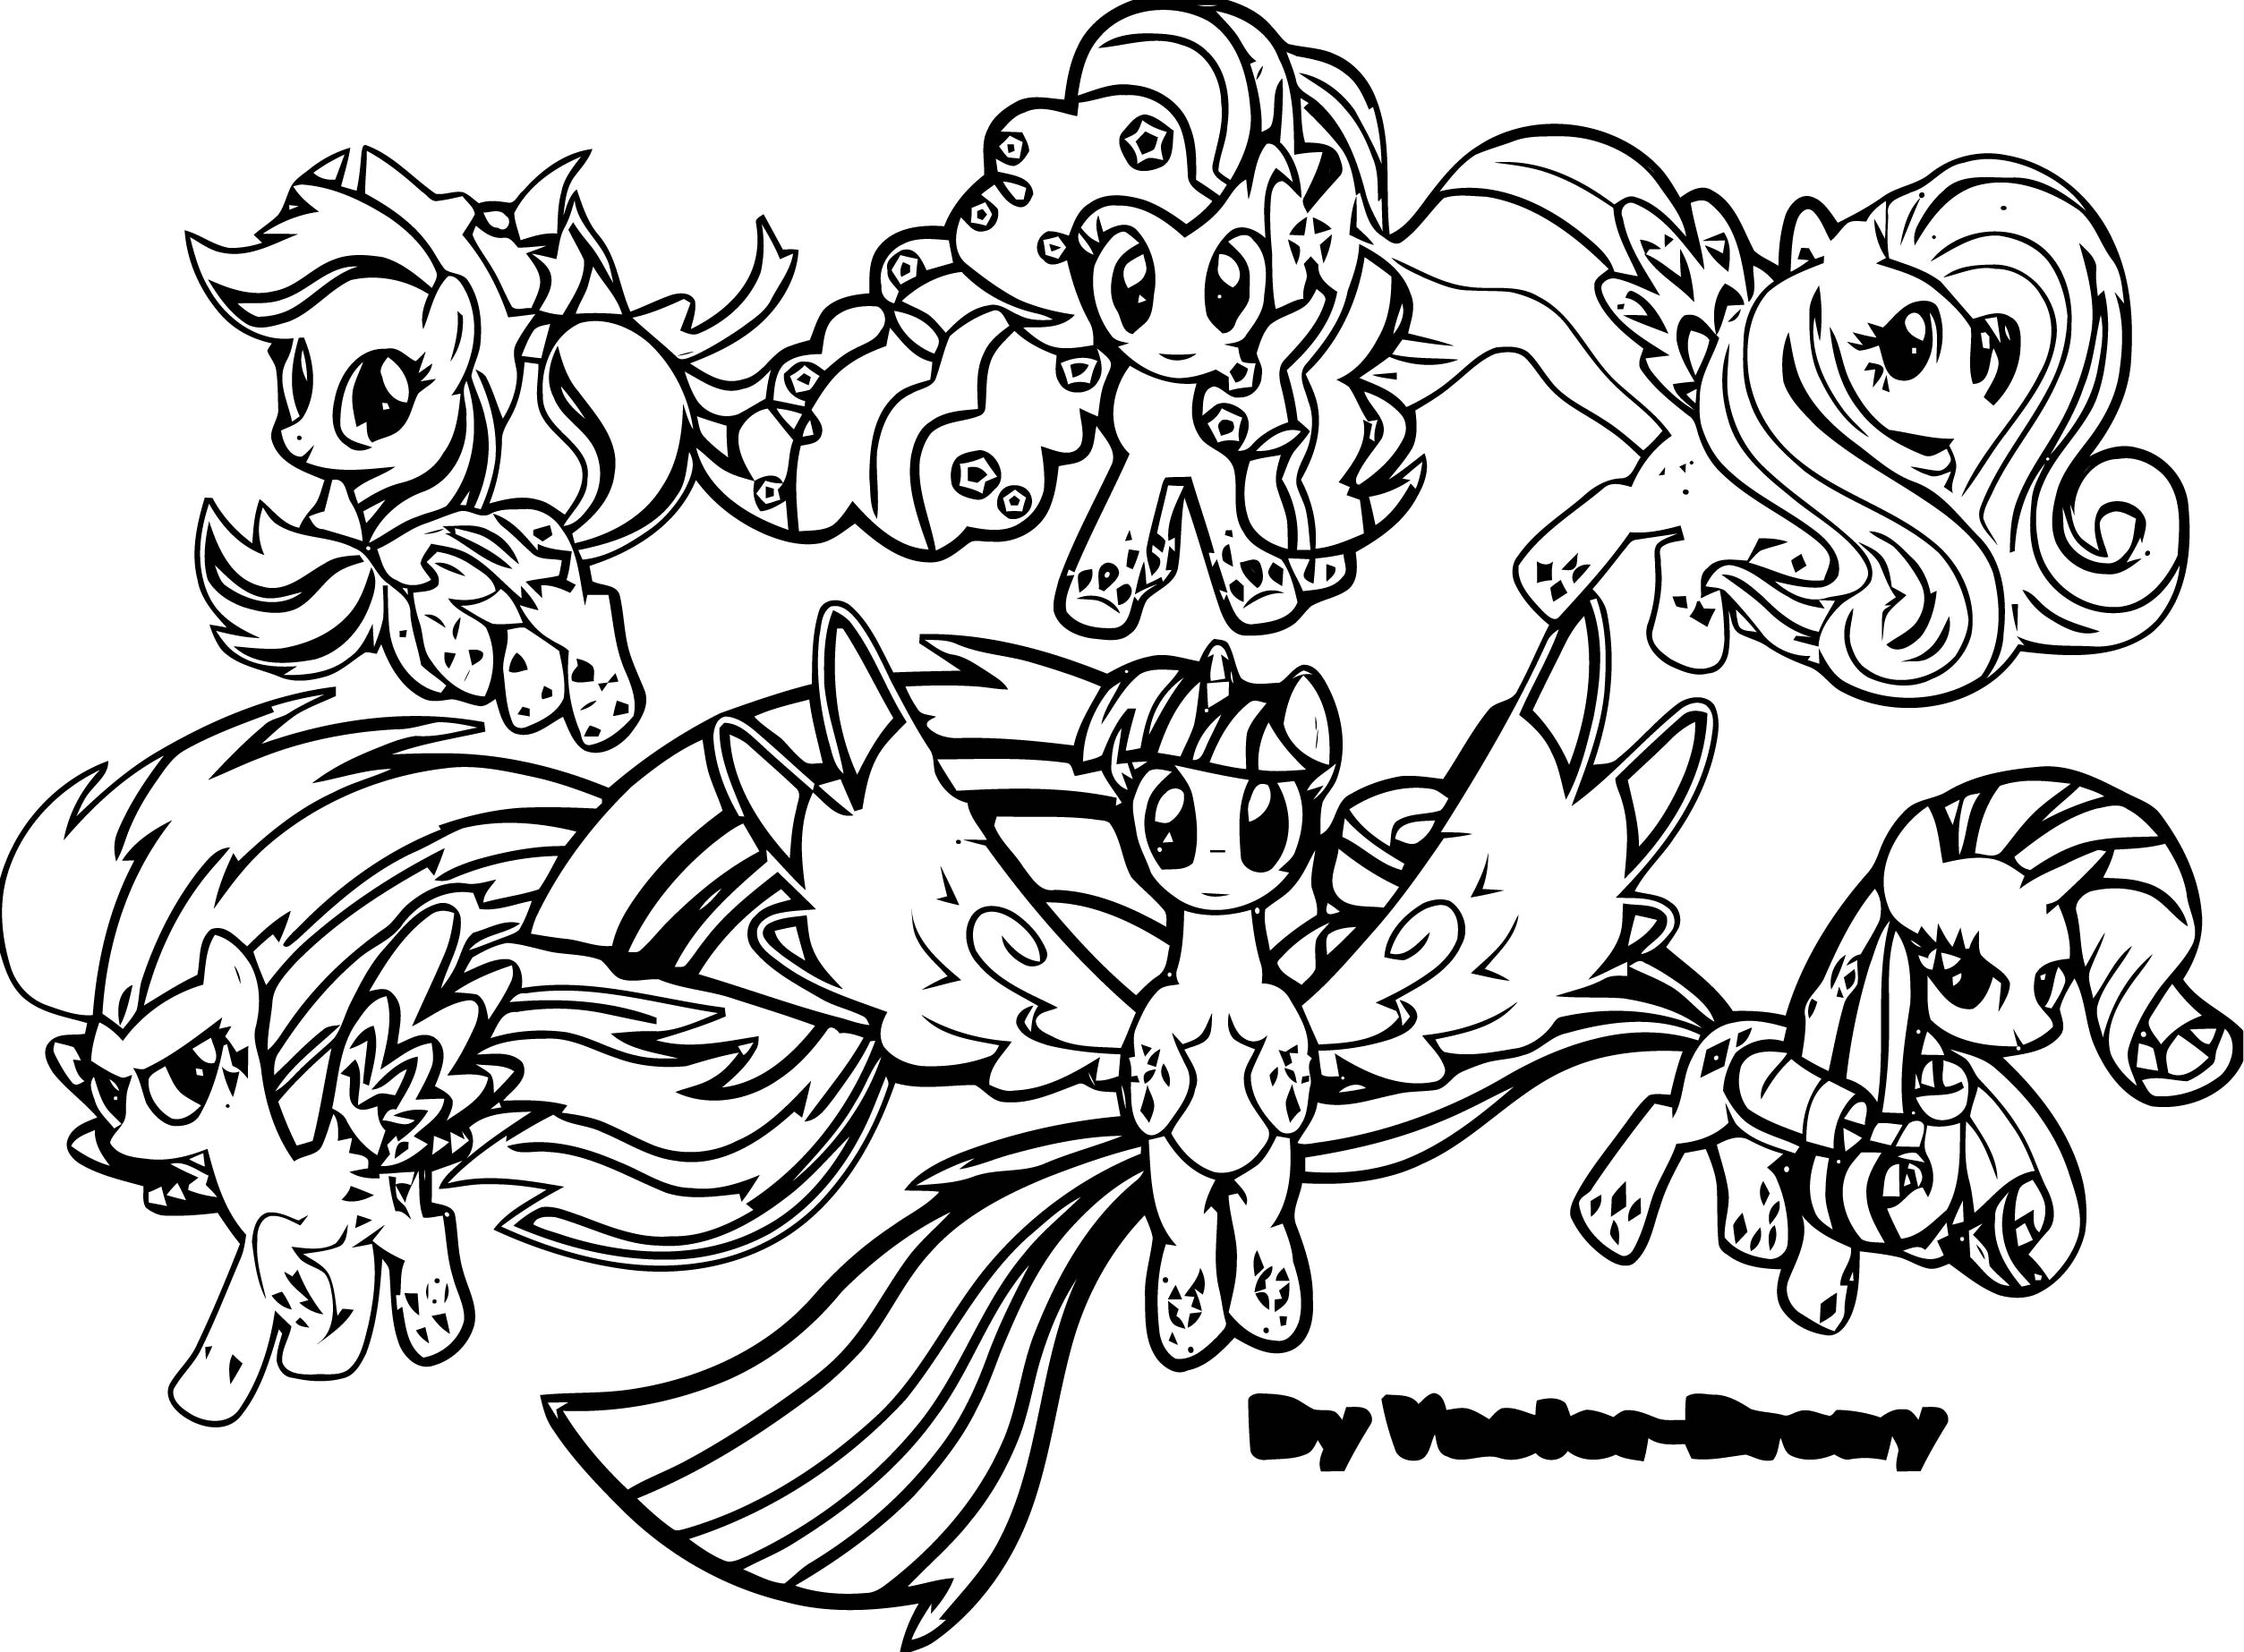 Twilight Sparkle Coloring Page Coloring Pages 0 | The Best Porn Website